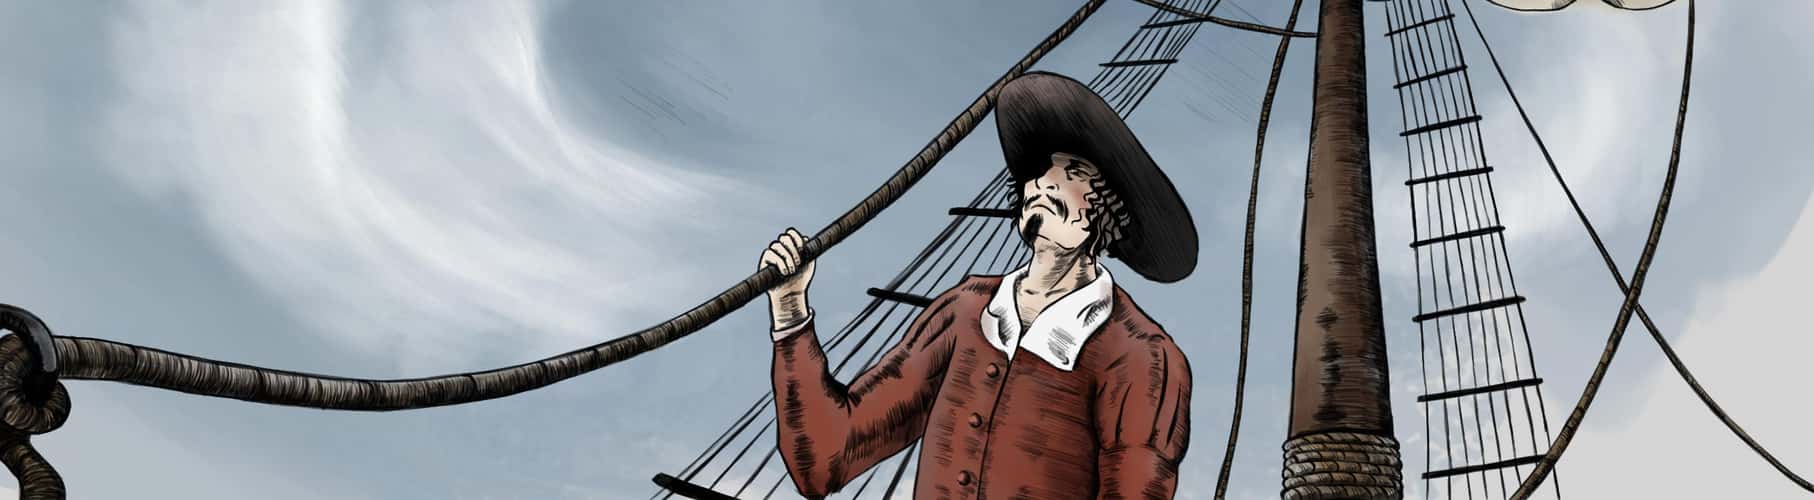 The Ghost of the Pirate, Jean Lafitte - a favorite ghost story for the groups which visit us on Galveston Island.